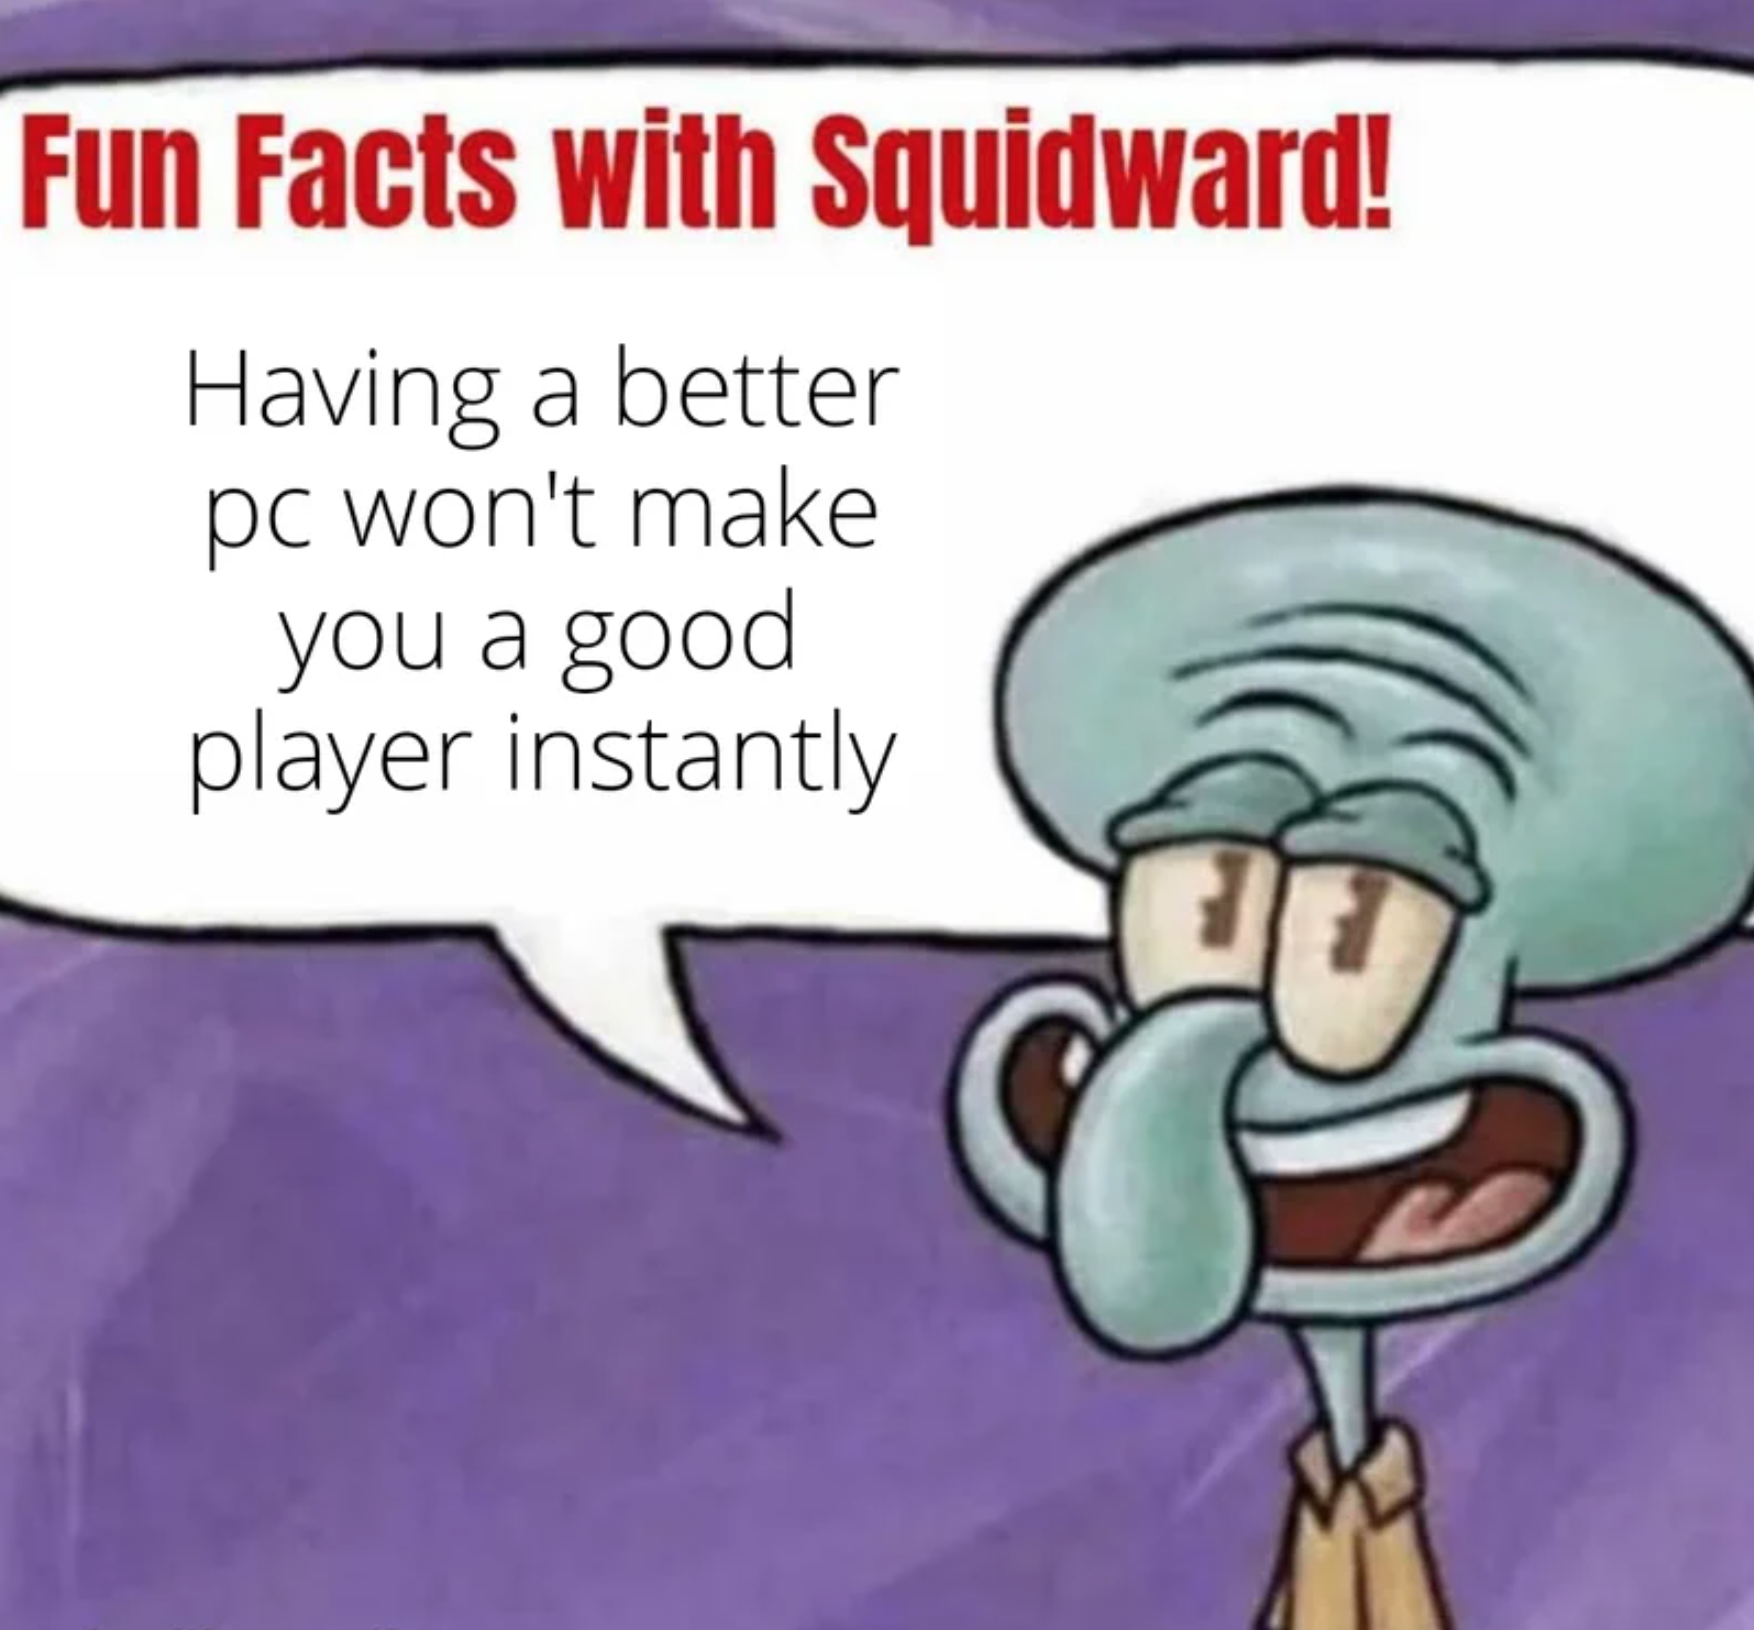 funny gaming memes - fun facts with squidward meme - Fun Facts with Squidward! Having a better pc won't make you a good player instantly